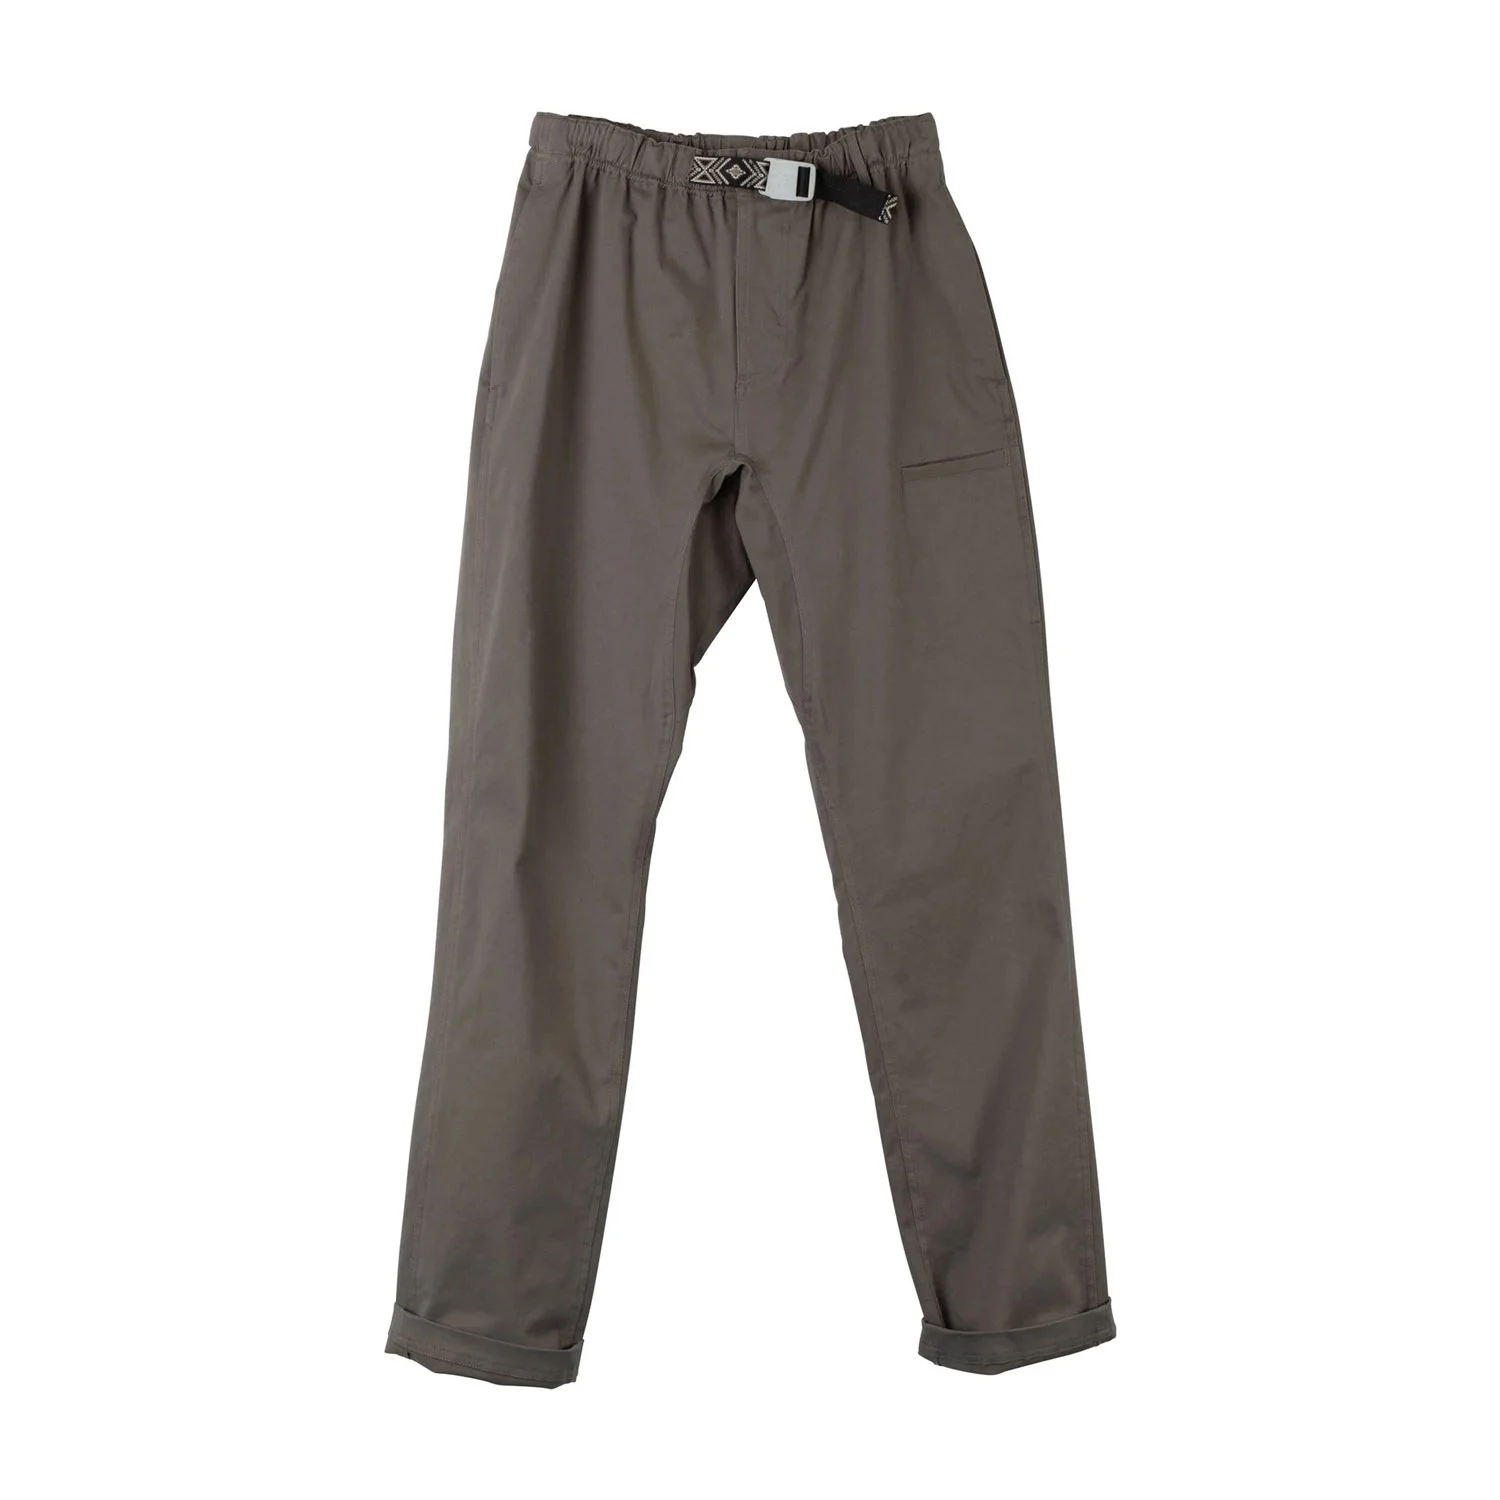 Kavu Hit The Road Pant - Dusty Sage